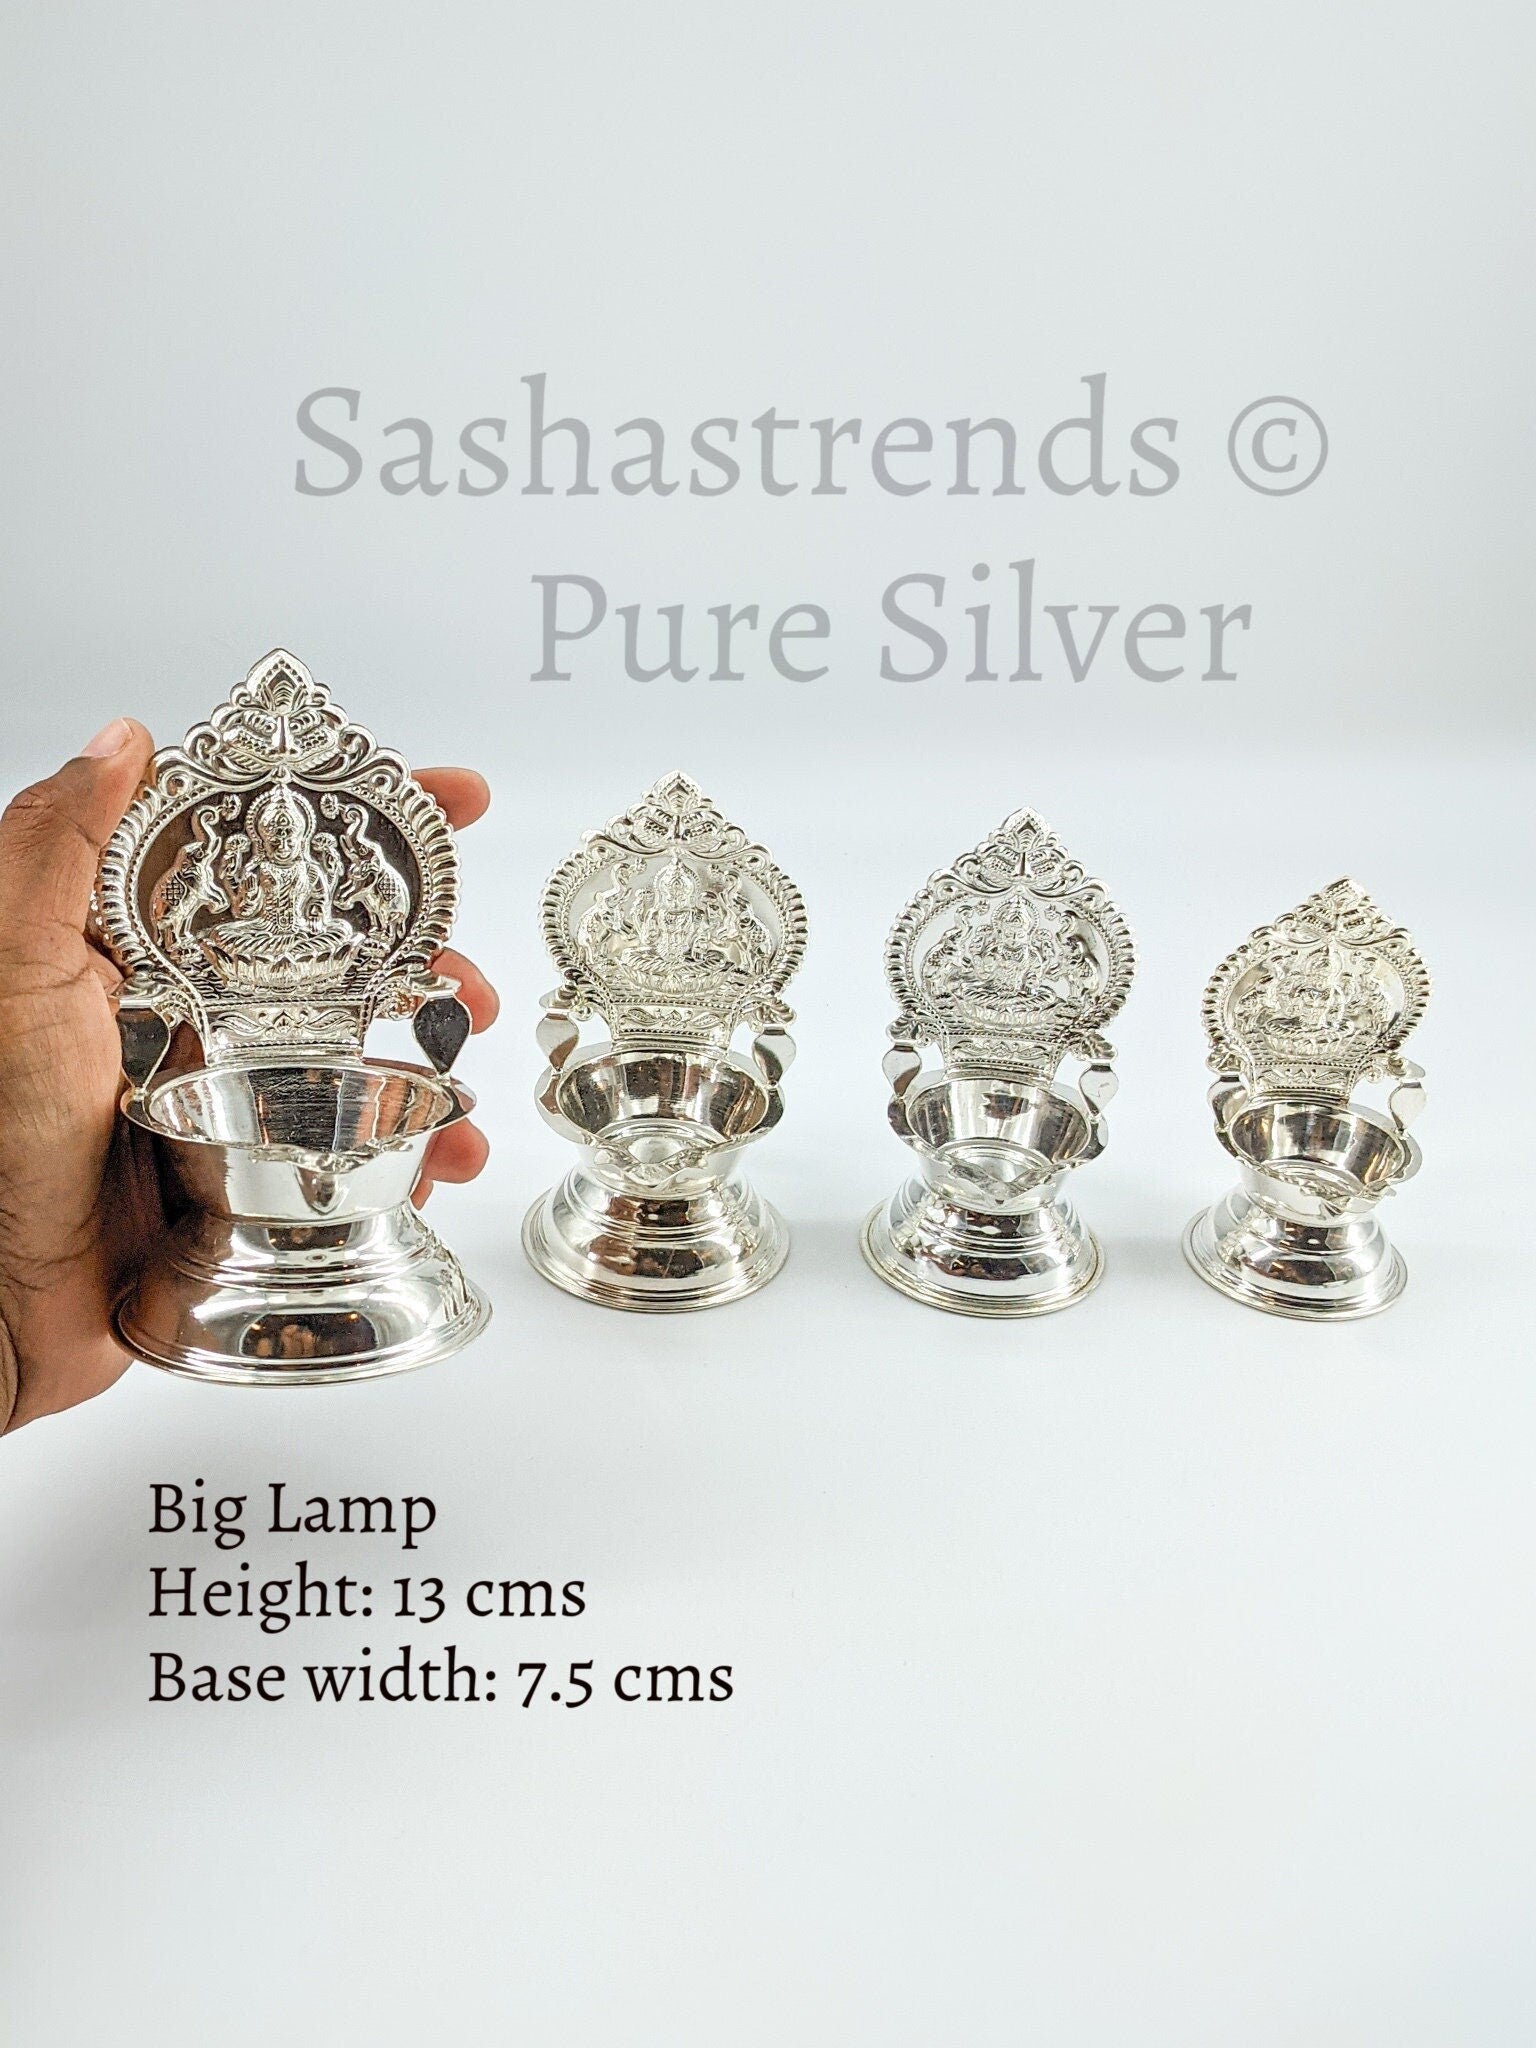 Silver Gift Articles In Ahmedabad - Prices, Manufacturers & Suppliers